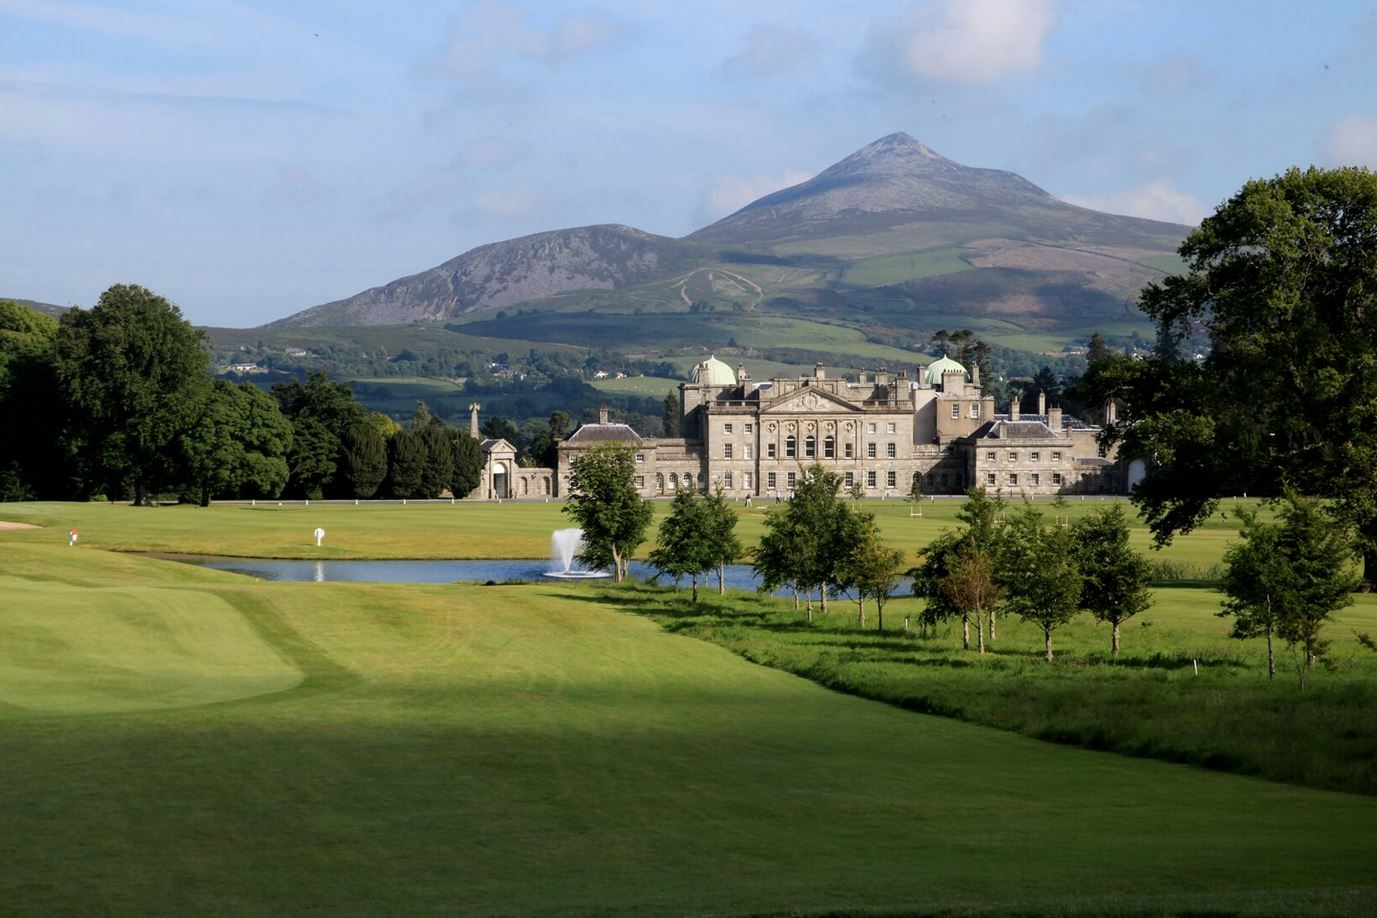 Raise funds for deserving charities with a round of golf at the prestigious Powerscourt Estate